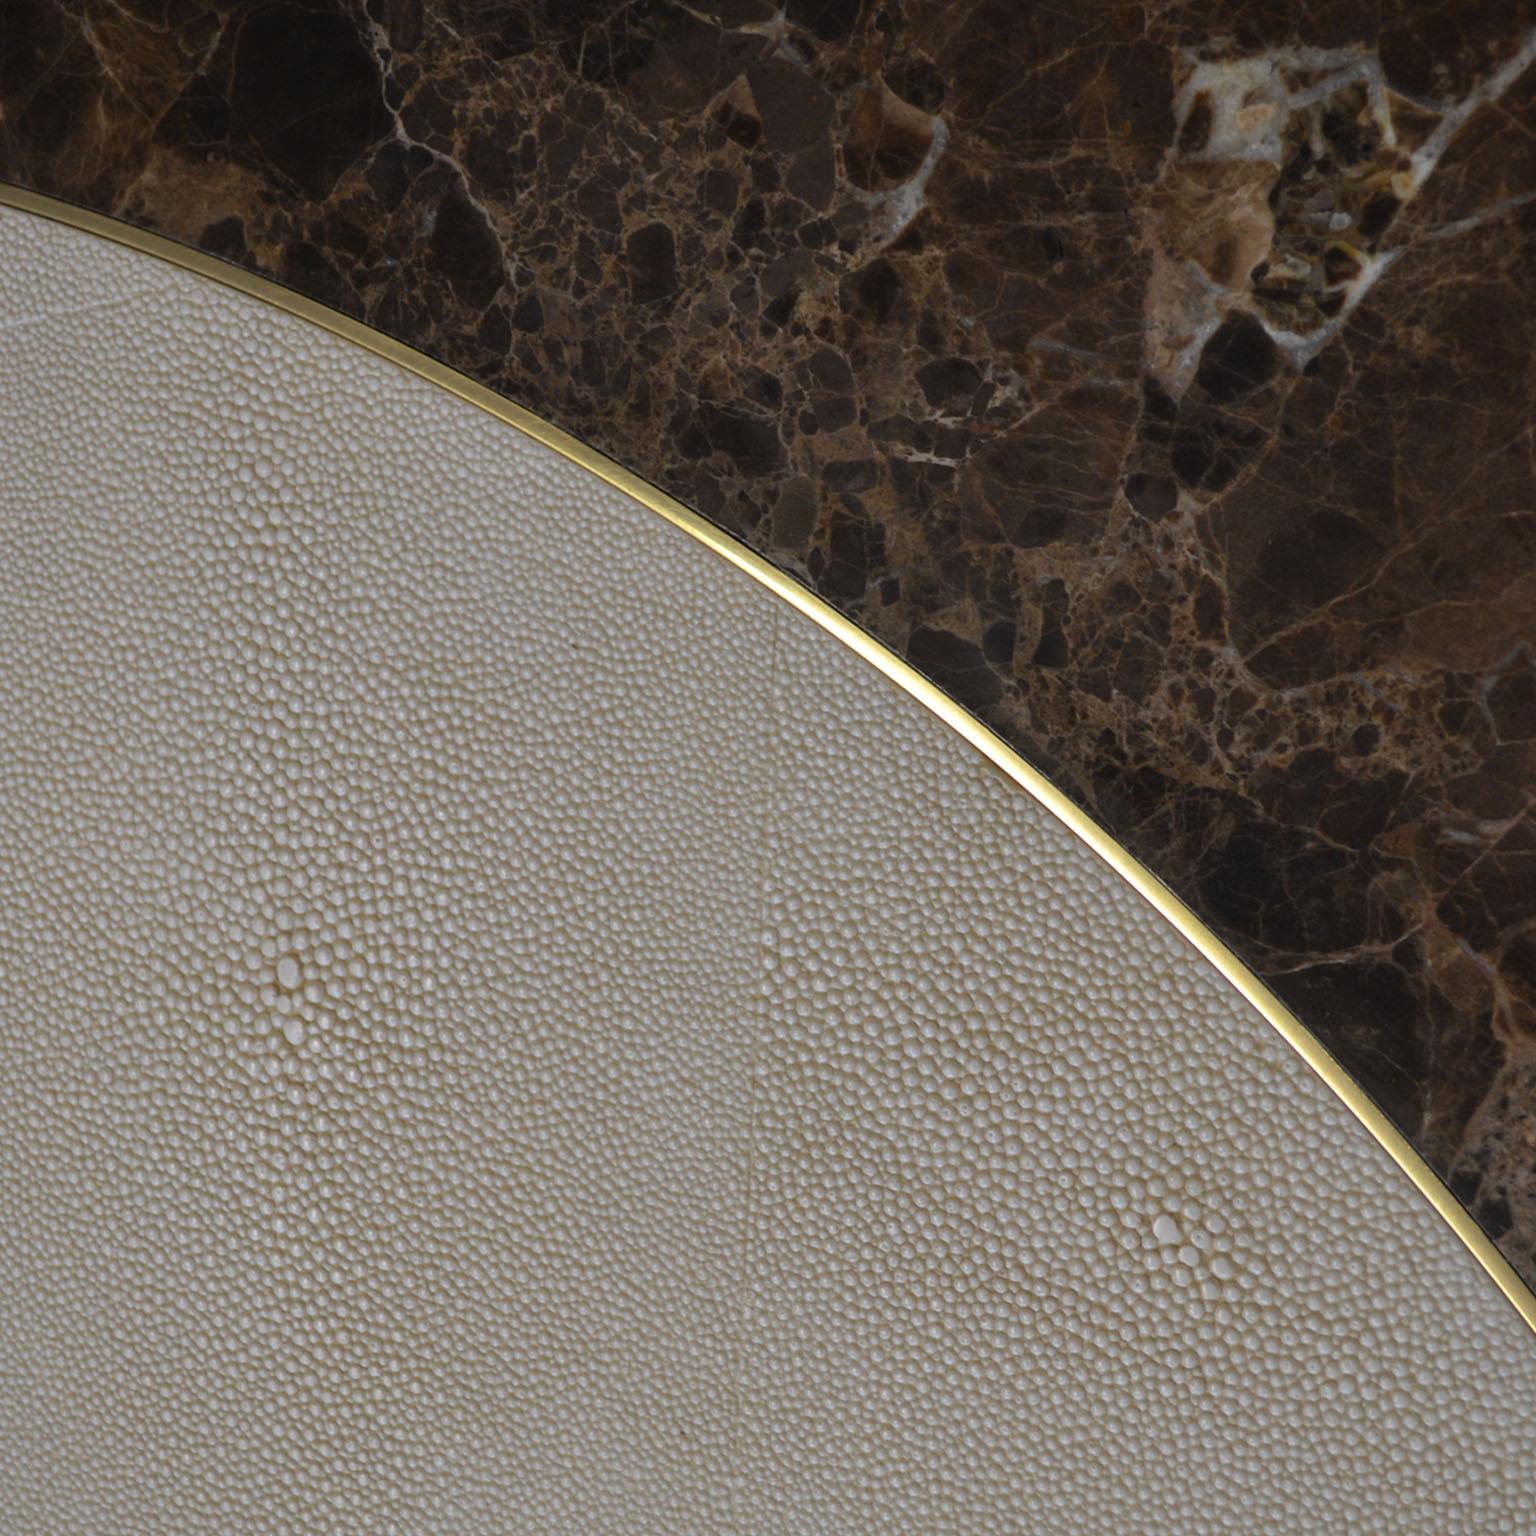 In Aurelio round table the scagliola shagreen meets the elegance of the Brown Emperador marble and the refined accents of the polished brass.
The purpose is to show to our valued customers a new concept of the scagliola art technique where the